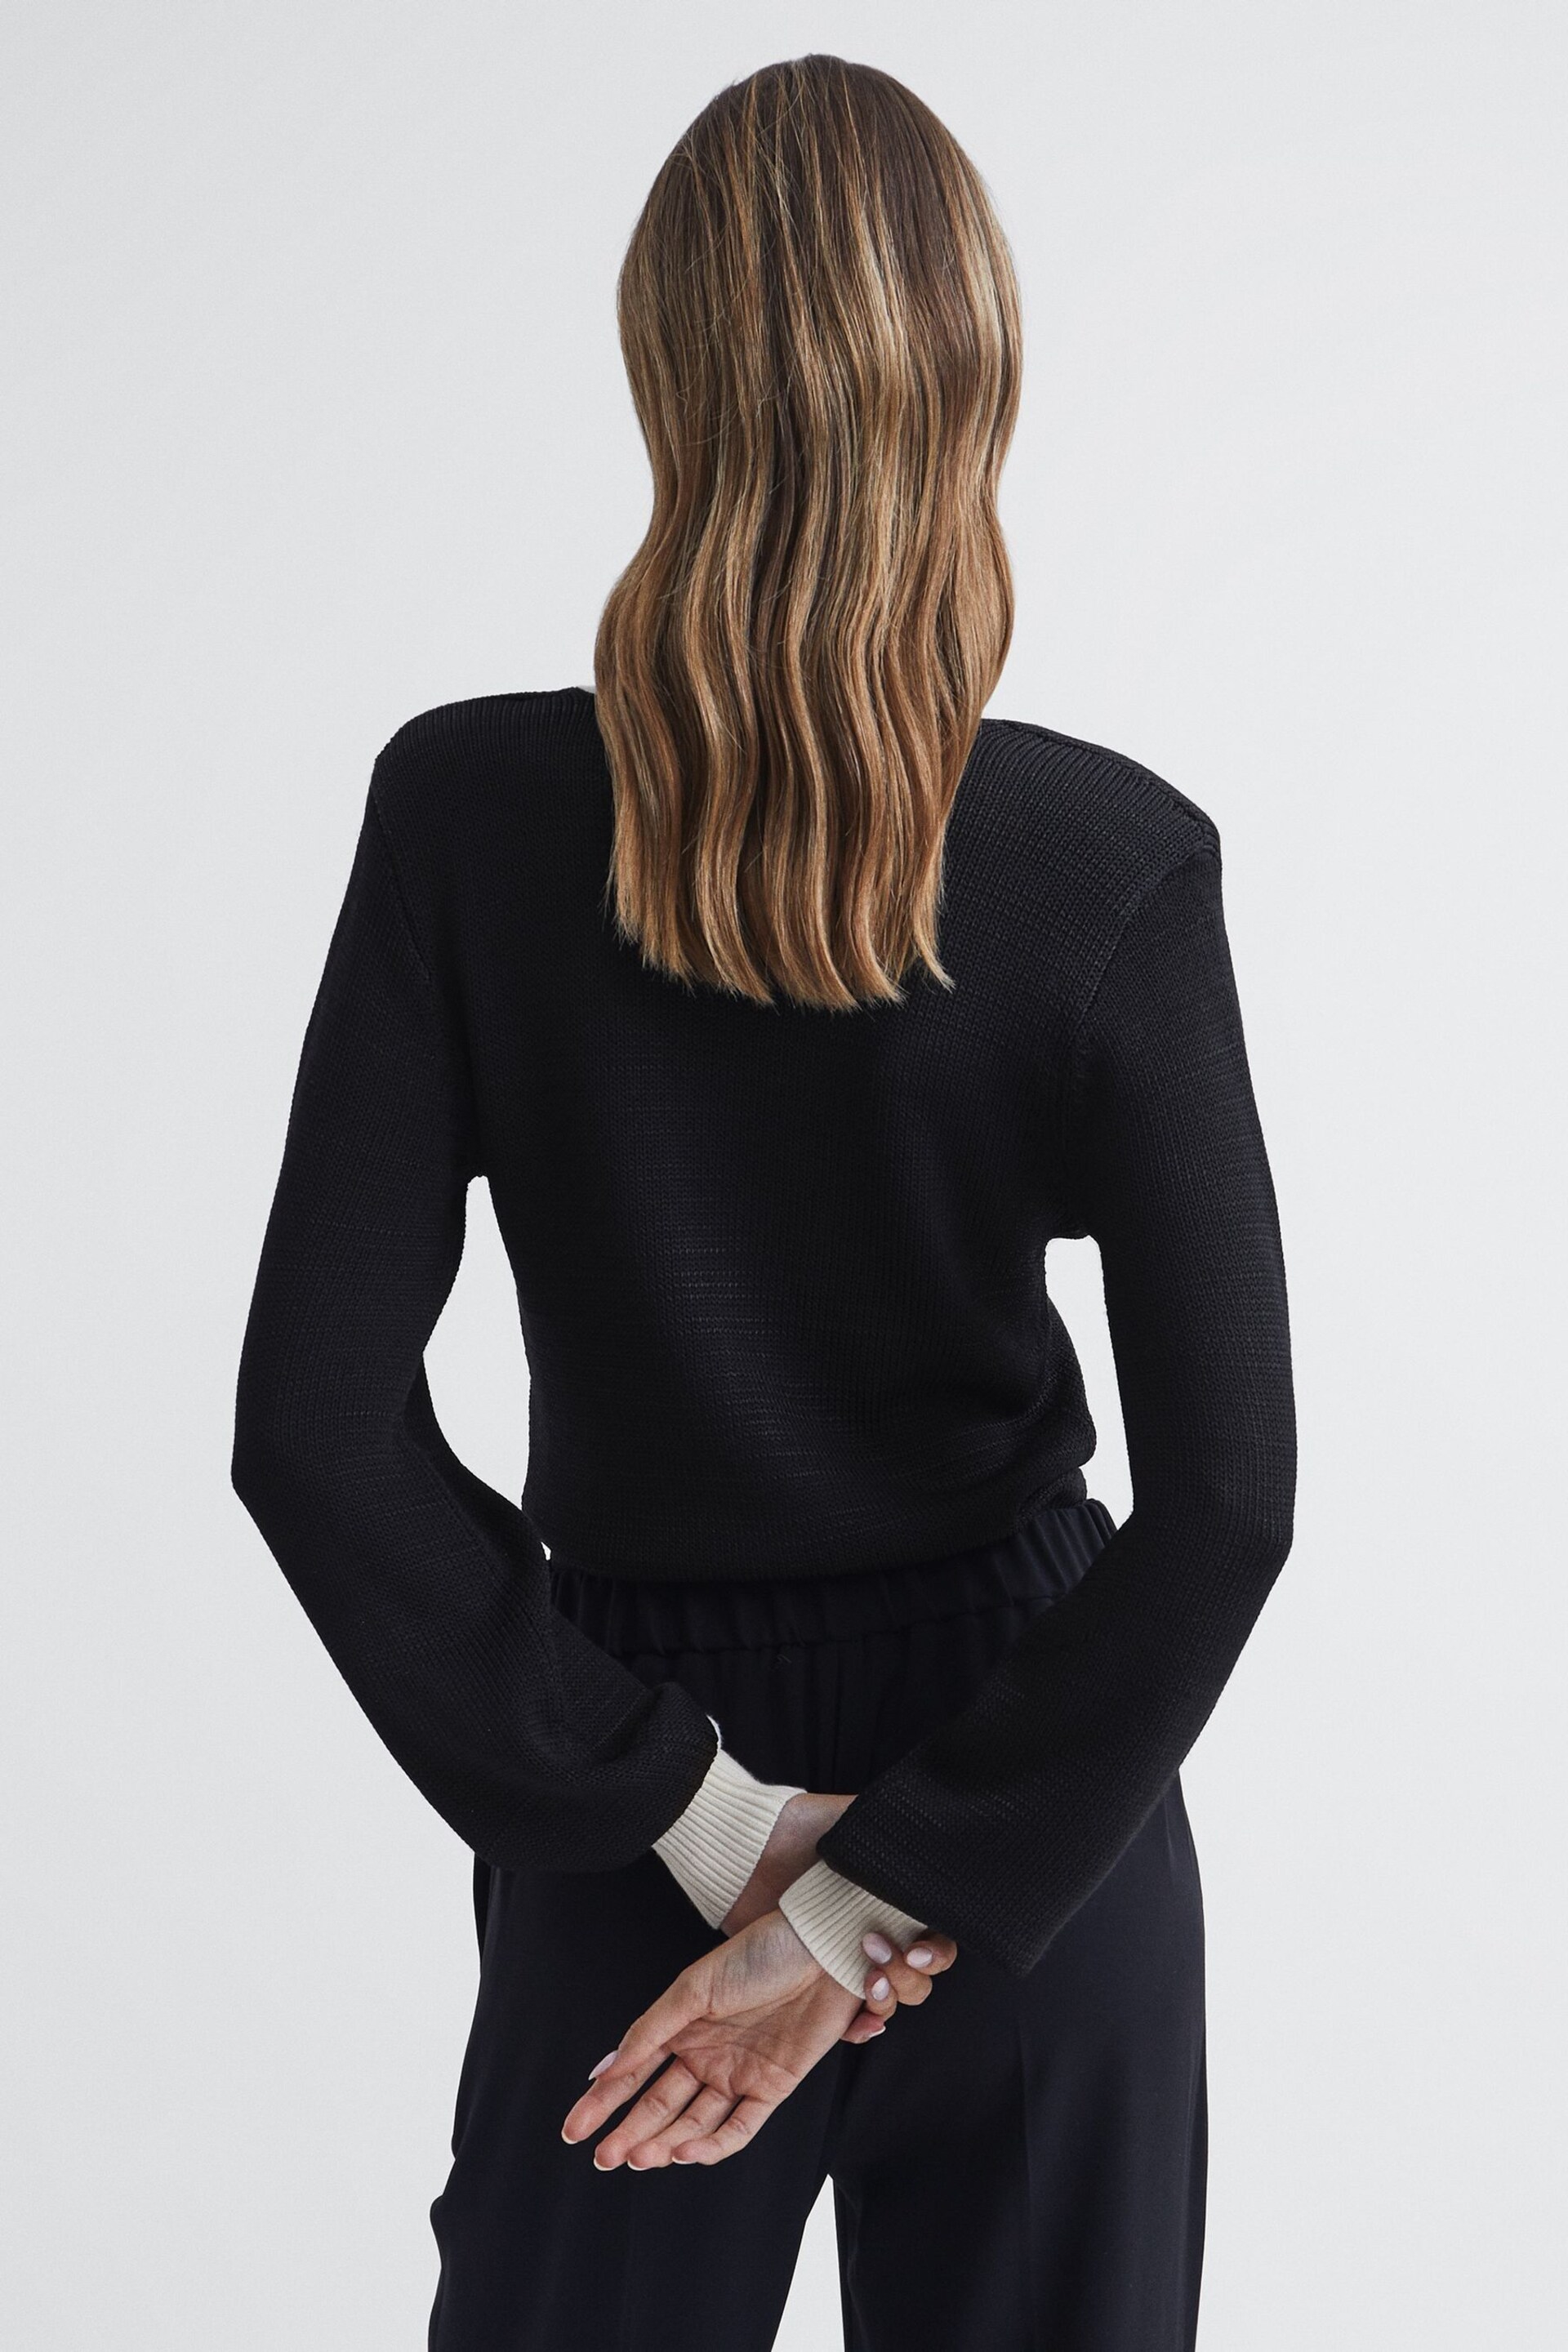 Reiss Black Talitha Contrast Trim Knitted Jumper - Image 5 of 5